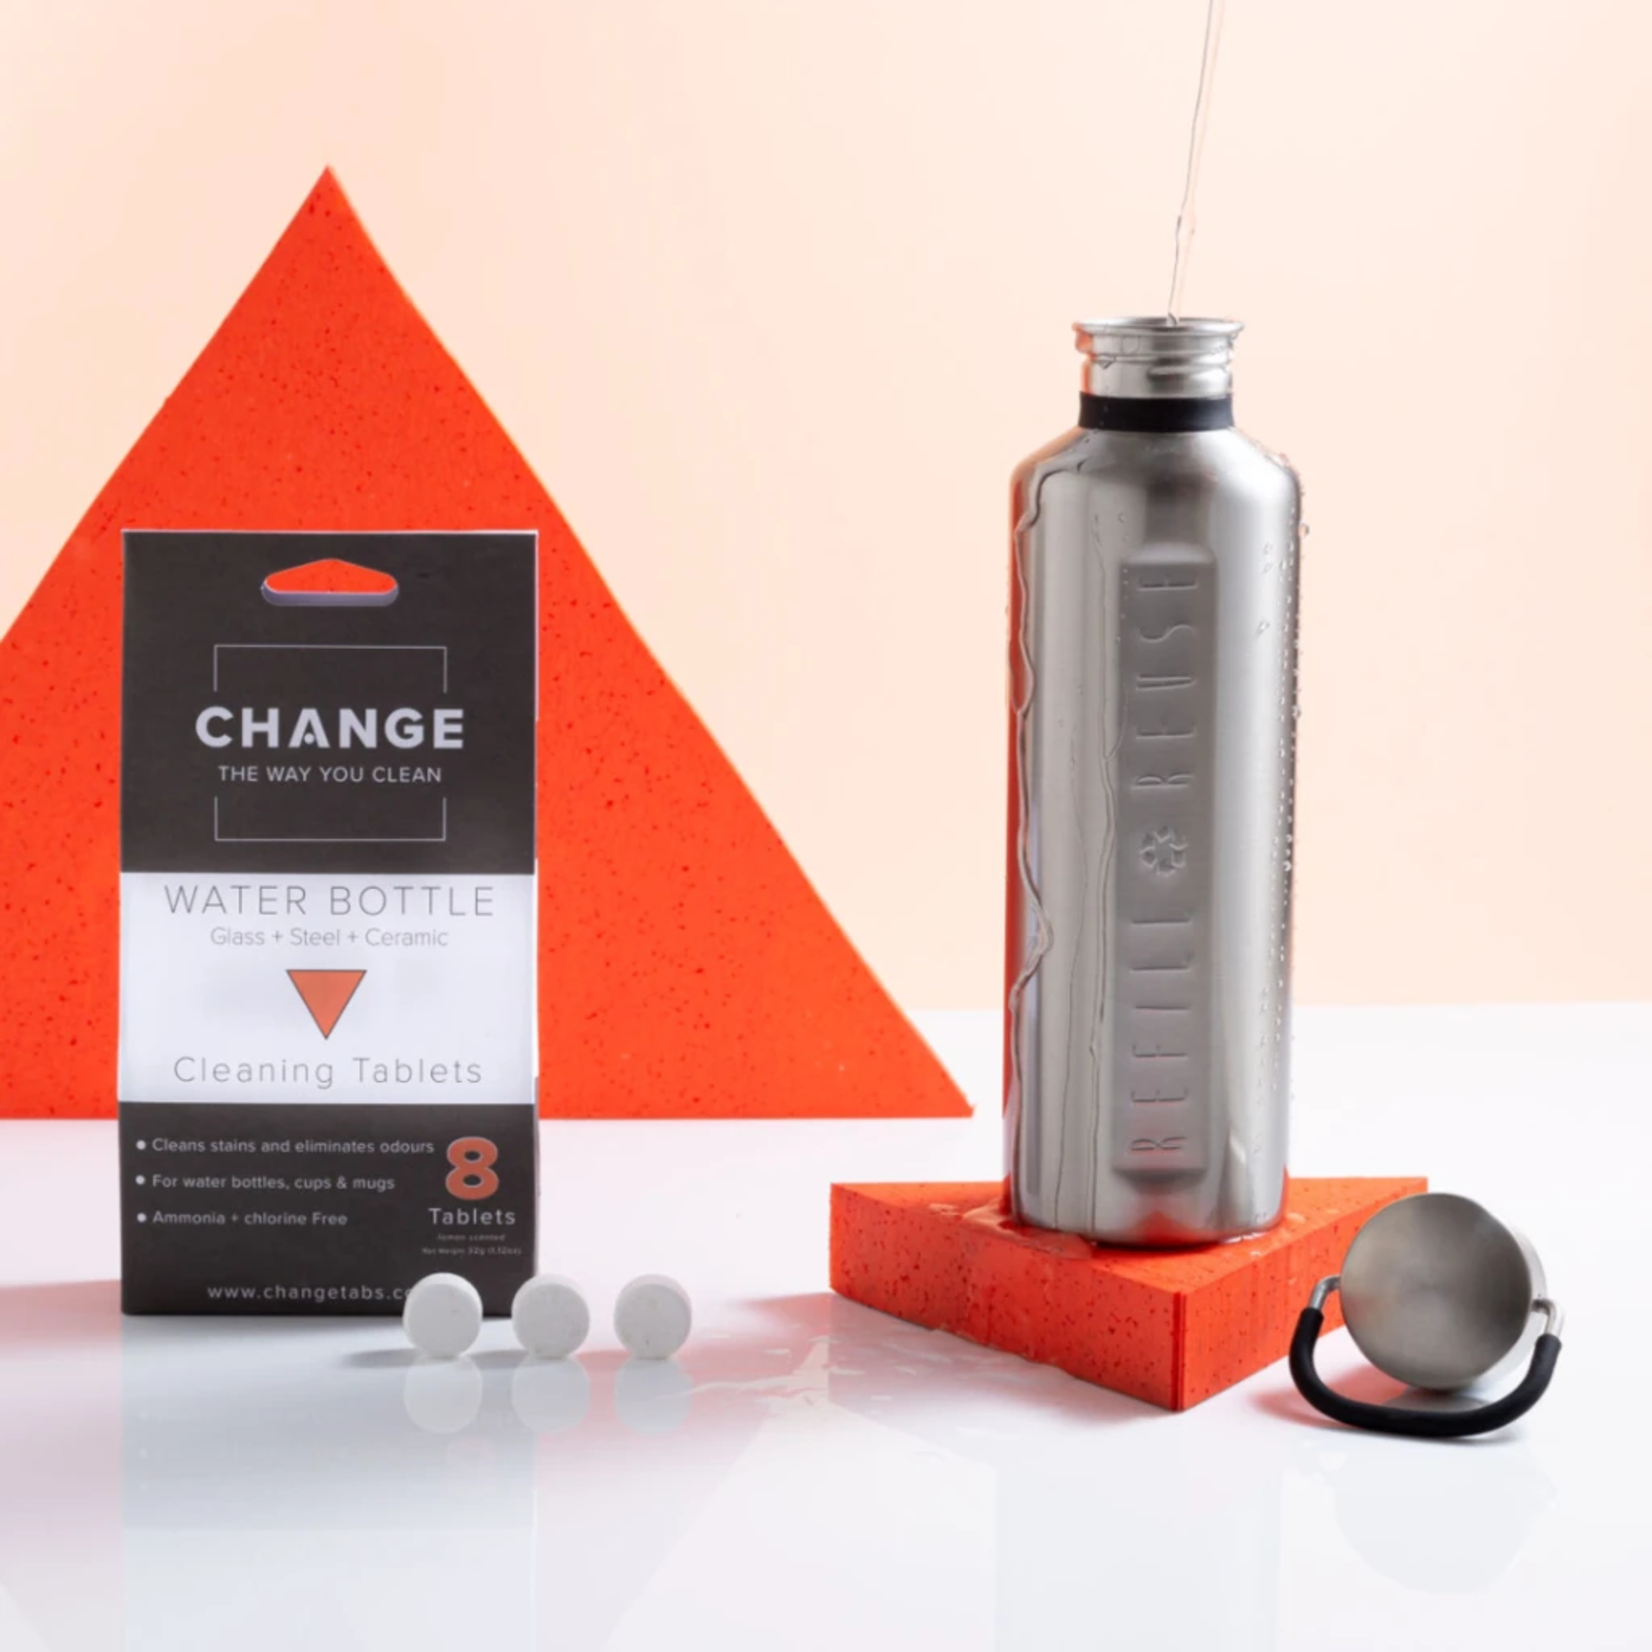 Change Change Water Bottle Cleaning Tablets